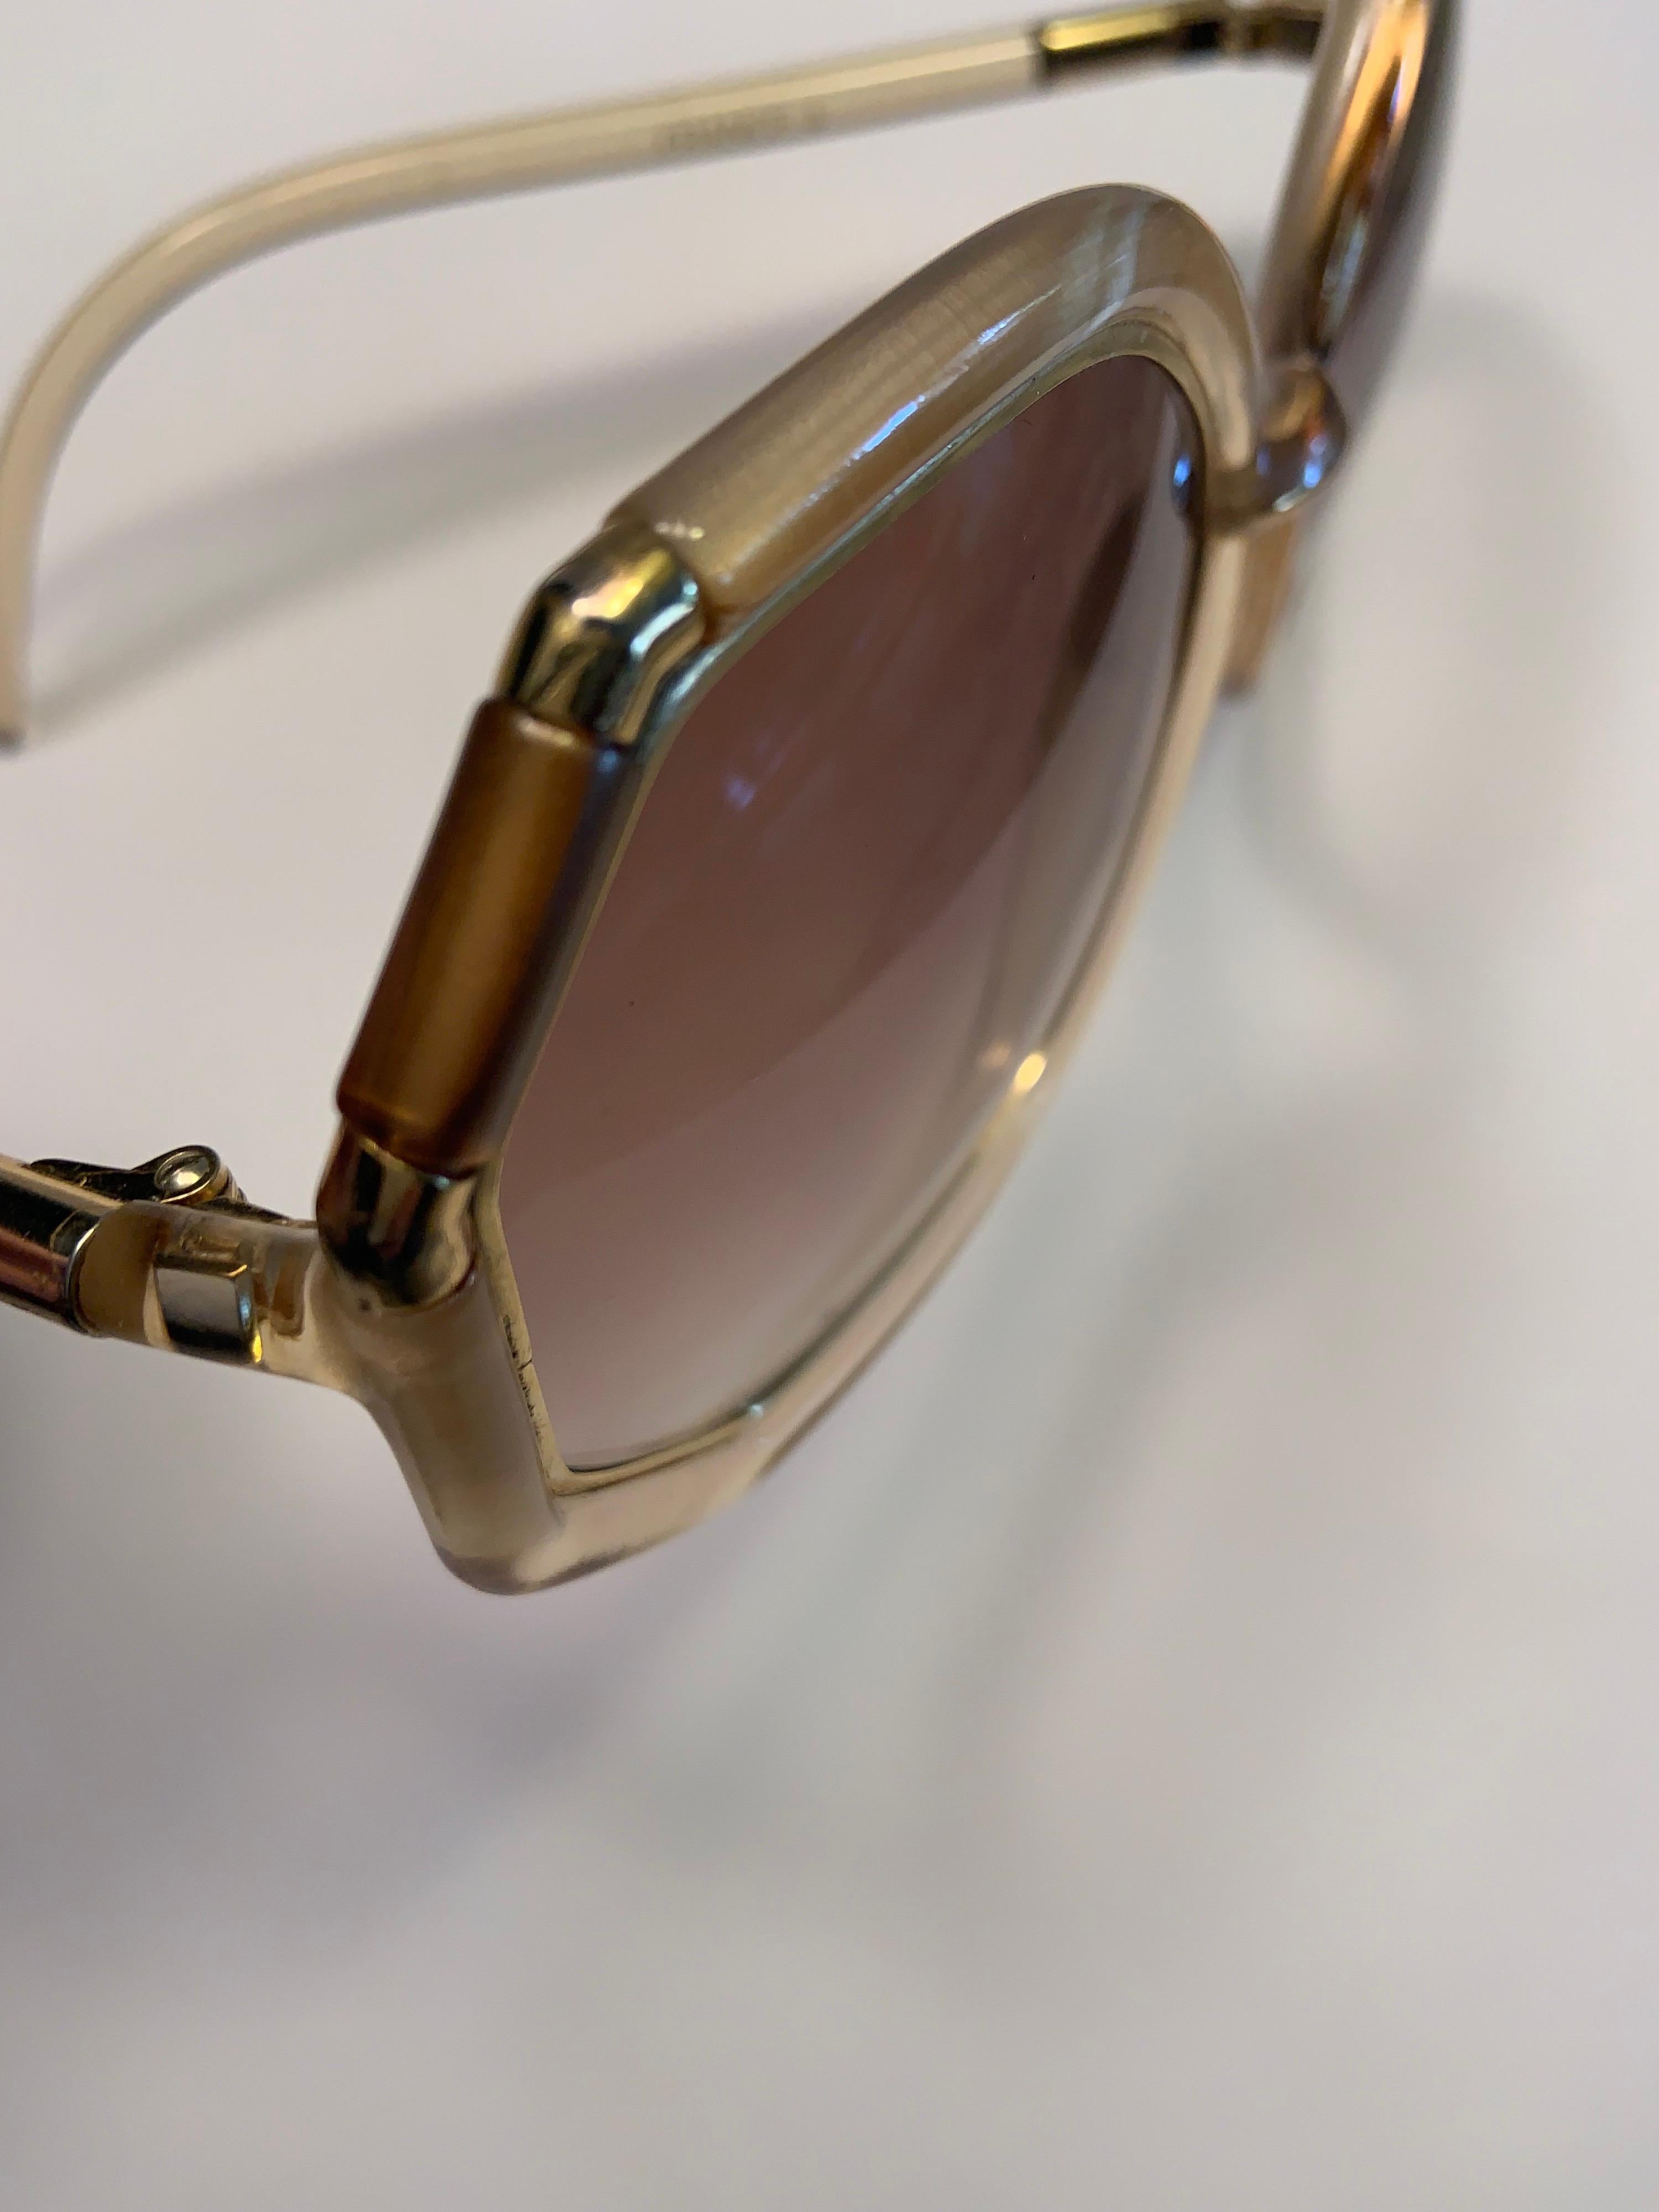 Oversized sunglasses from the 1970's never seem to go out of style.  These glasses are designed by French designer Ted Lapidus and they are Made in France.  The frames are three different colors, Mother of Pearl, gold toned metal, and smoky